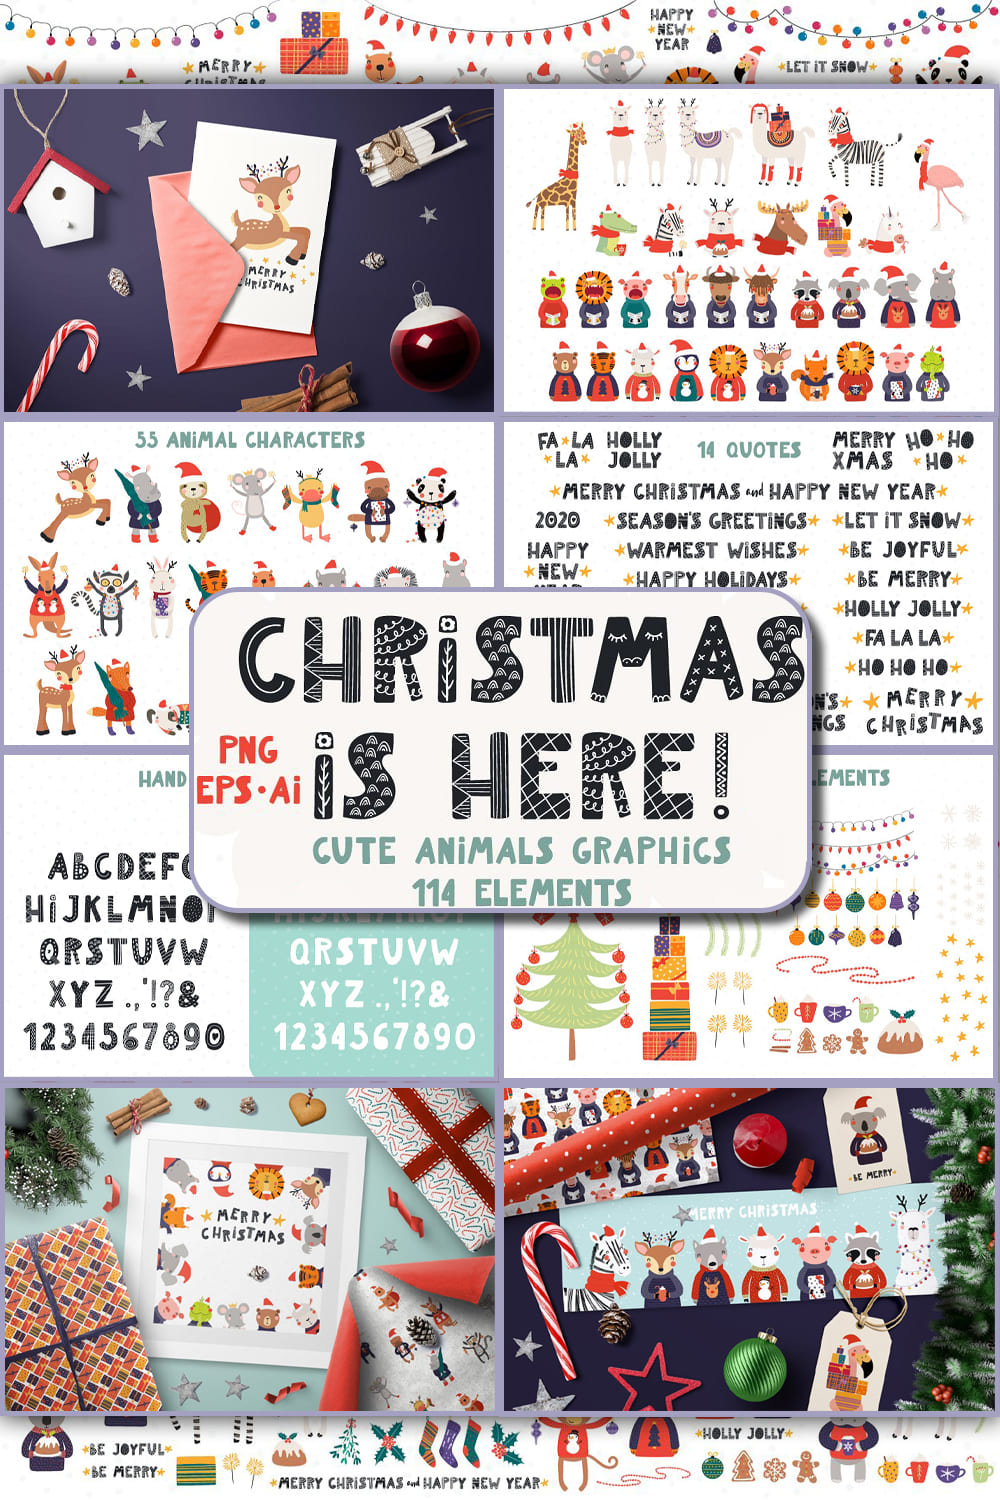 4270704 christmas is here cute graphics pinterest 1000 1500